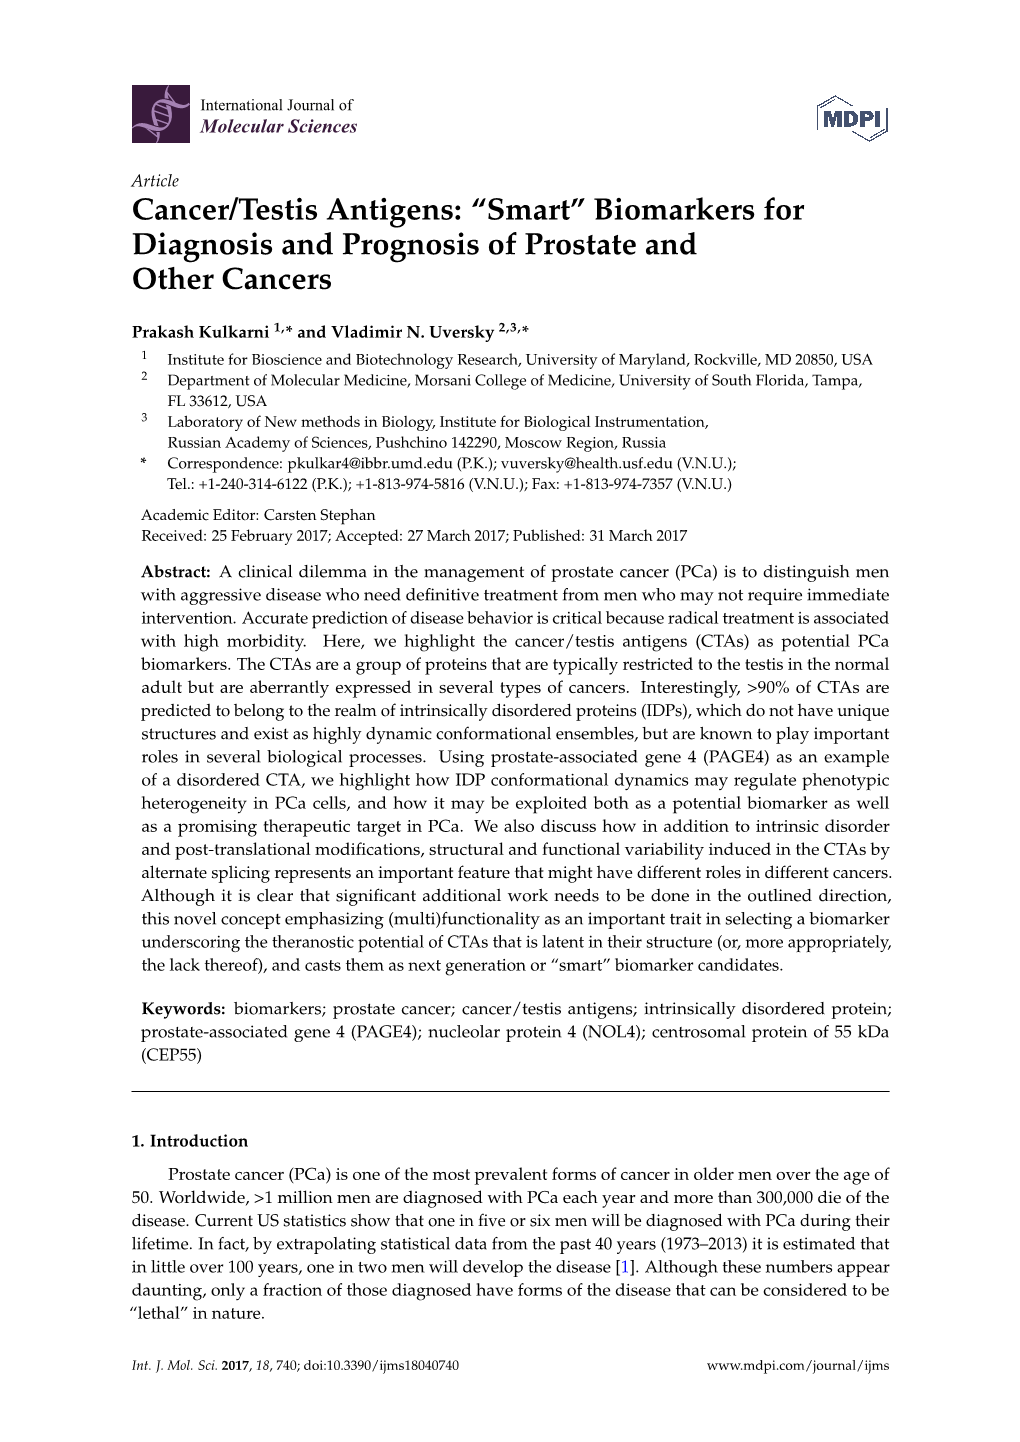 Cancer/Testis Antigens: “Smart” Biomarkers for Diagnosis and Prognosis of Prostate and Other Cancers